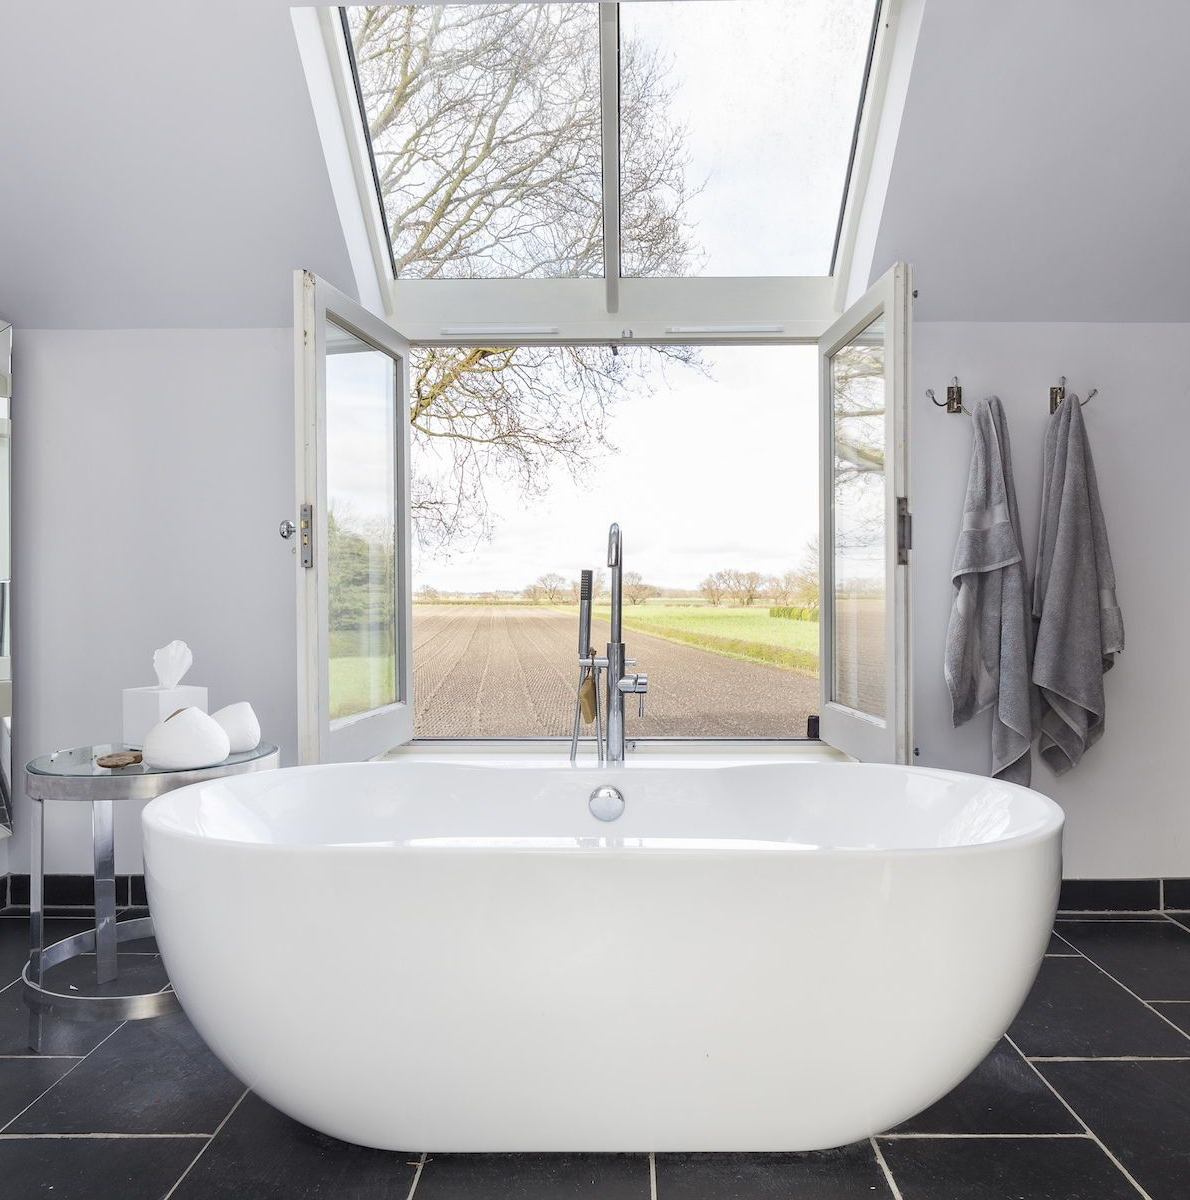 These Bathroom Design Trends Will Make A Surprising